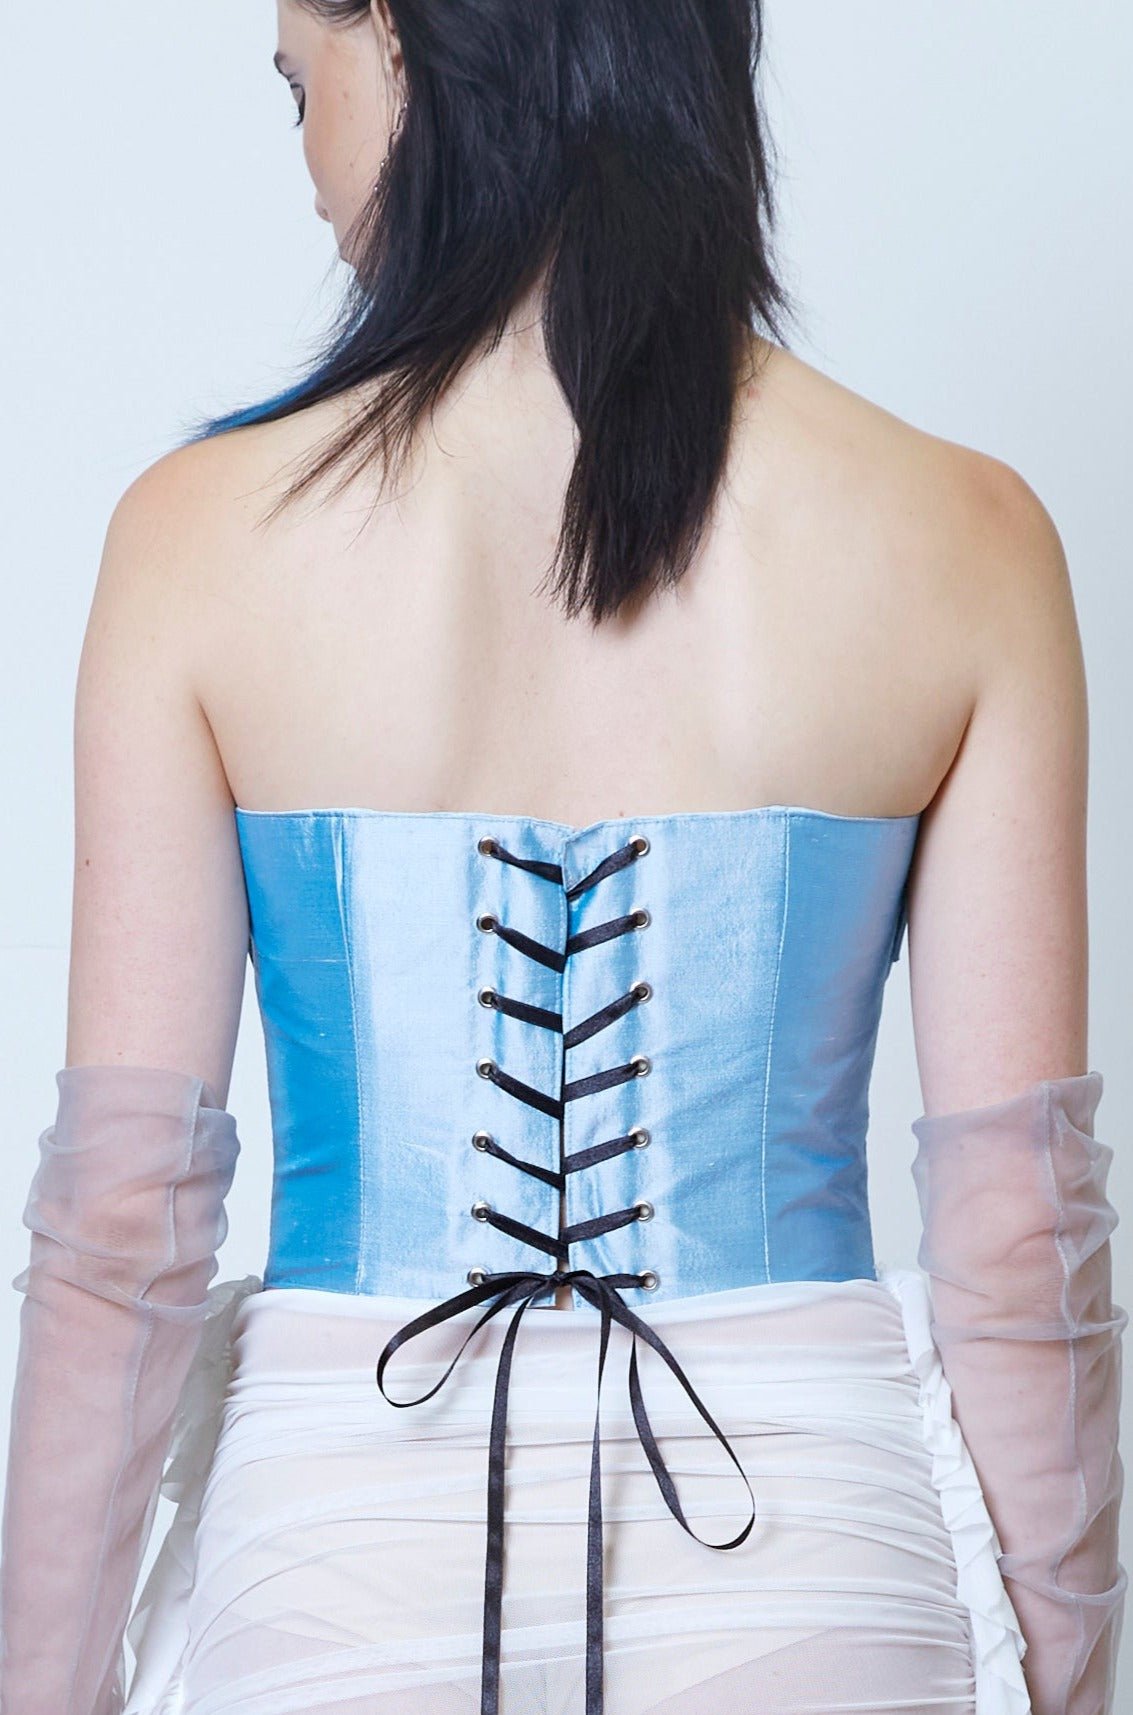 Blue silk corset with front detail - My Store, going out tops, bodice, going out outfit, going out tops uk, corset top